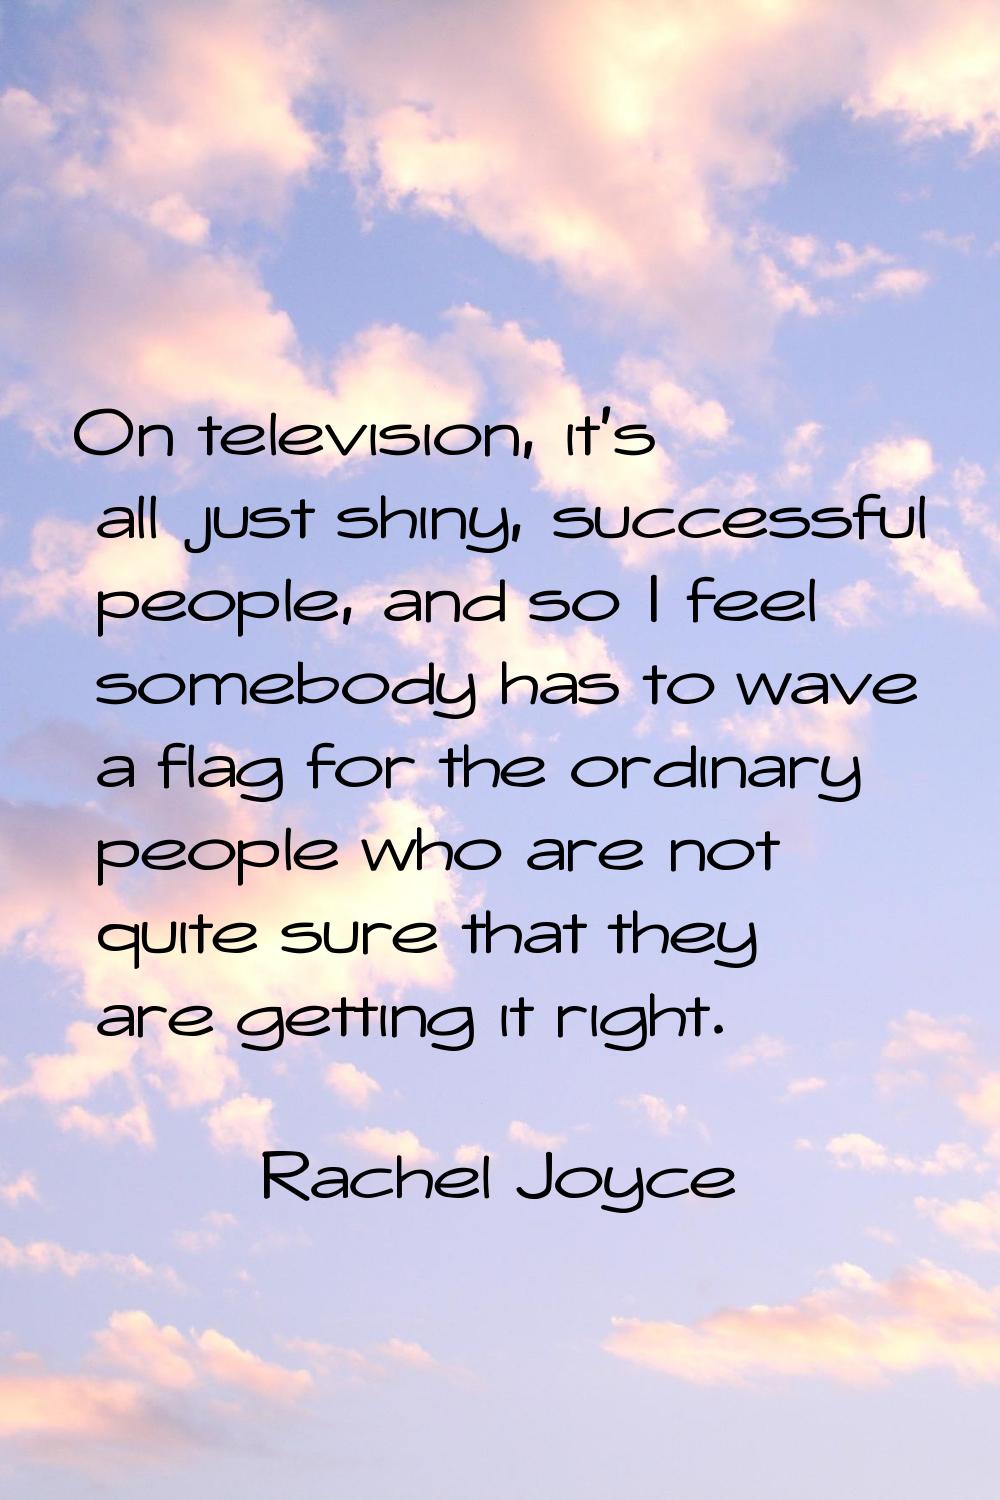 On television, it's all just shiny, successful people, and so I feel somebody has to wave a flag fo